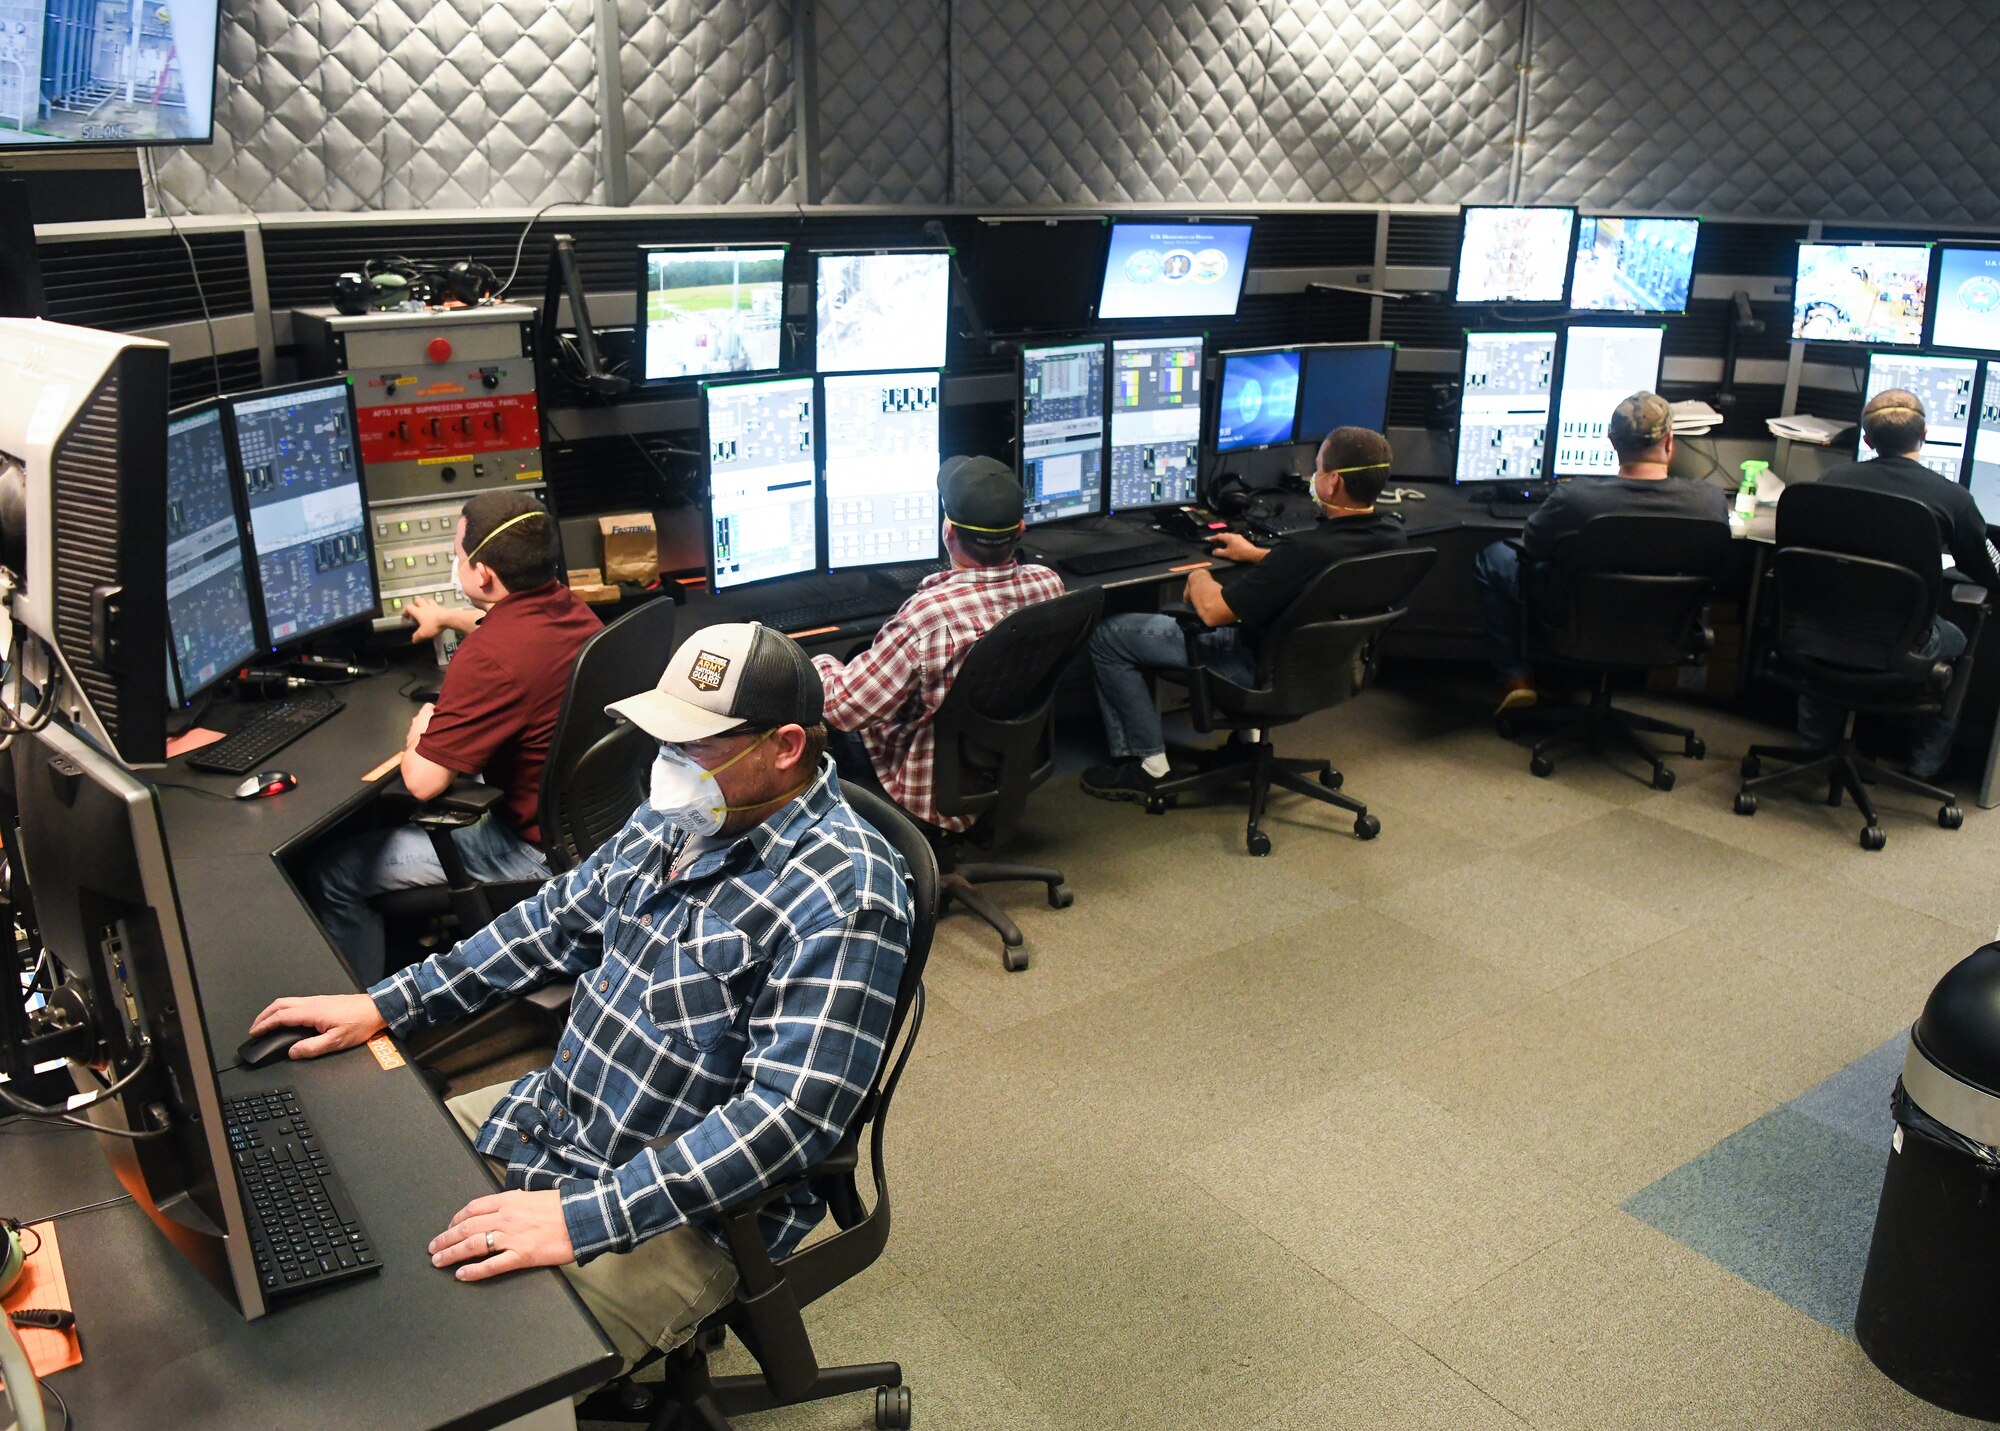 Joseph Cowan, left, an outside machinist, and other Team AEDC personnel work in the control room of the Arnold Engineering Development Complex (AEDC) Aerodynamic and Propulsion Test Unit (APTU), May 20, 2020, while wearing masks to help mitigate risk associated with the coronavirus pandemic. The APTU team has performed their tasks, providing hypersonic testing capabilities, without interruption during the pandemic. Hypersonics is considered a critical field for national defense. (U.S. Air Force photo by Jill Pickett)